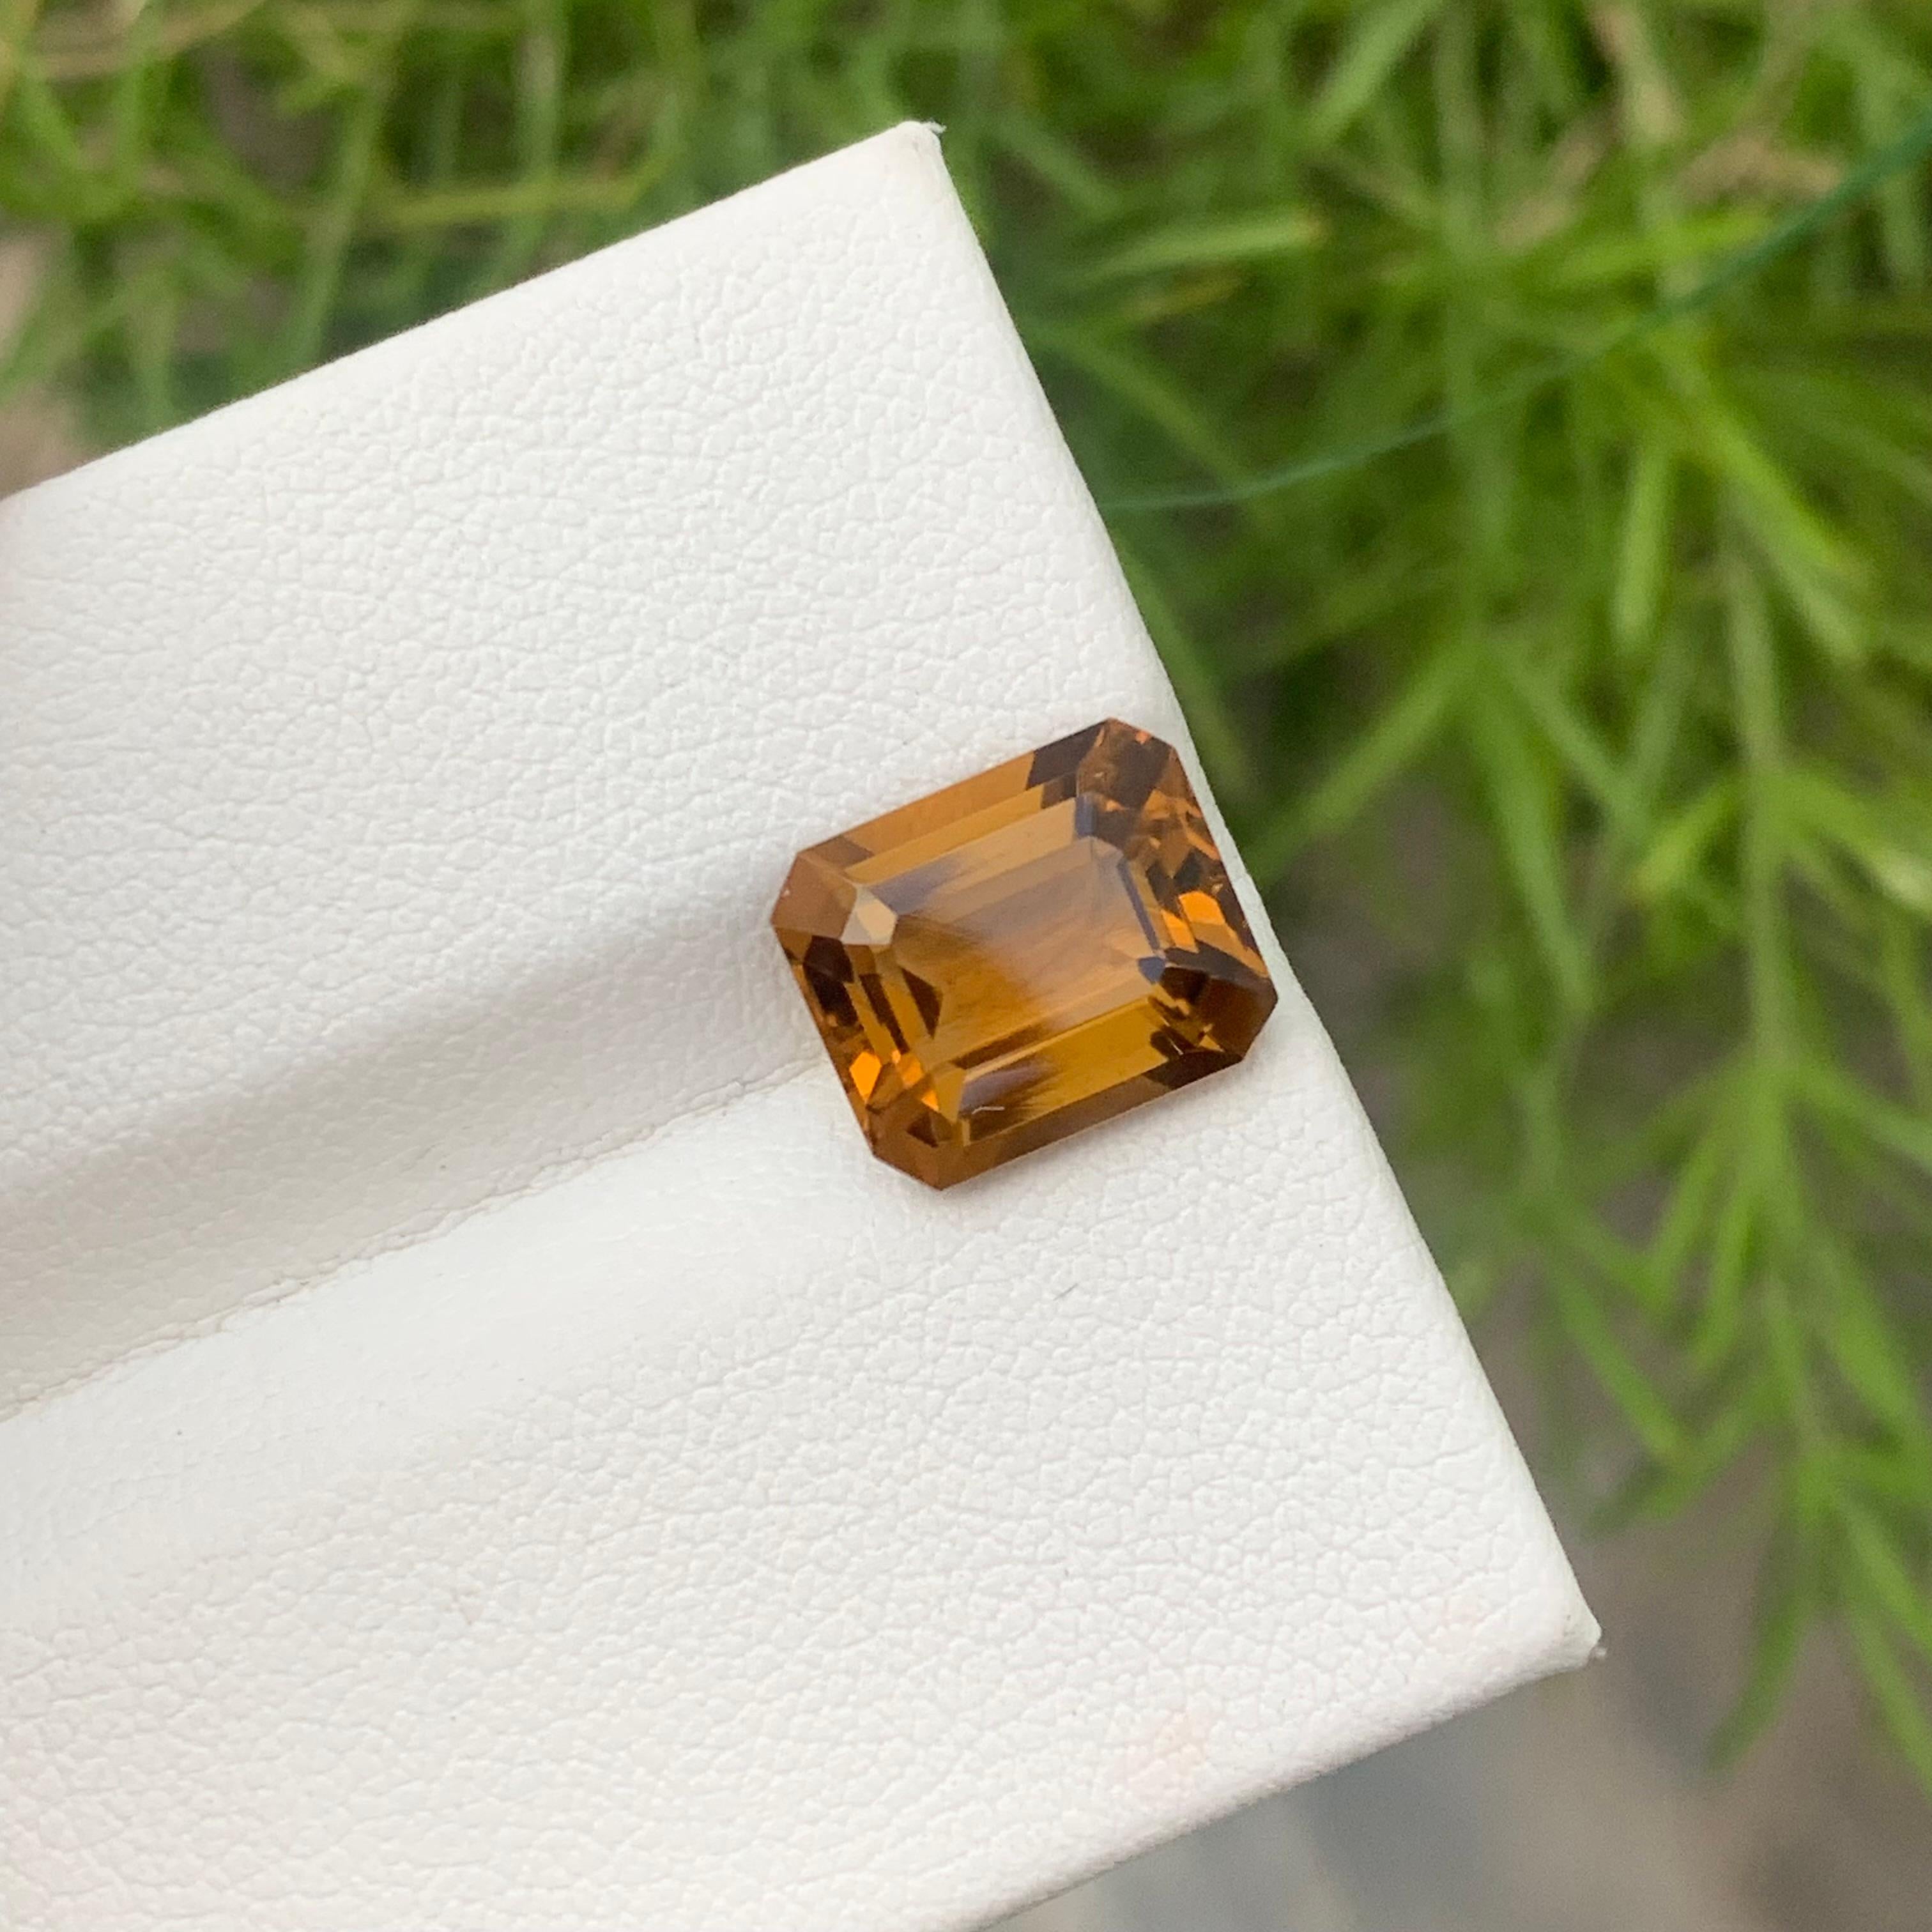 4.20 Carat Natural Loose Citrine Honey Color from Brazil Emerald Cut Gemstone For Sale 4